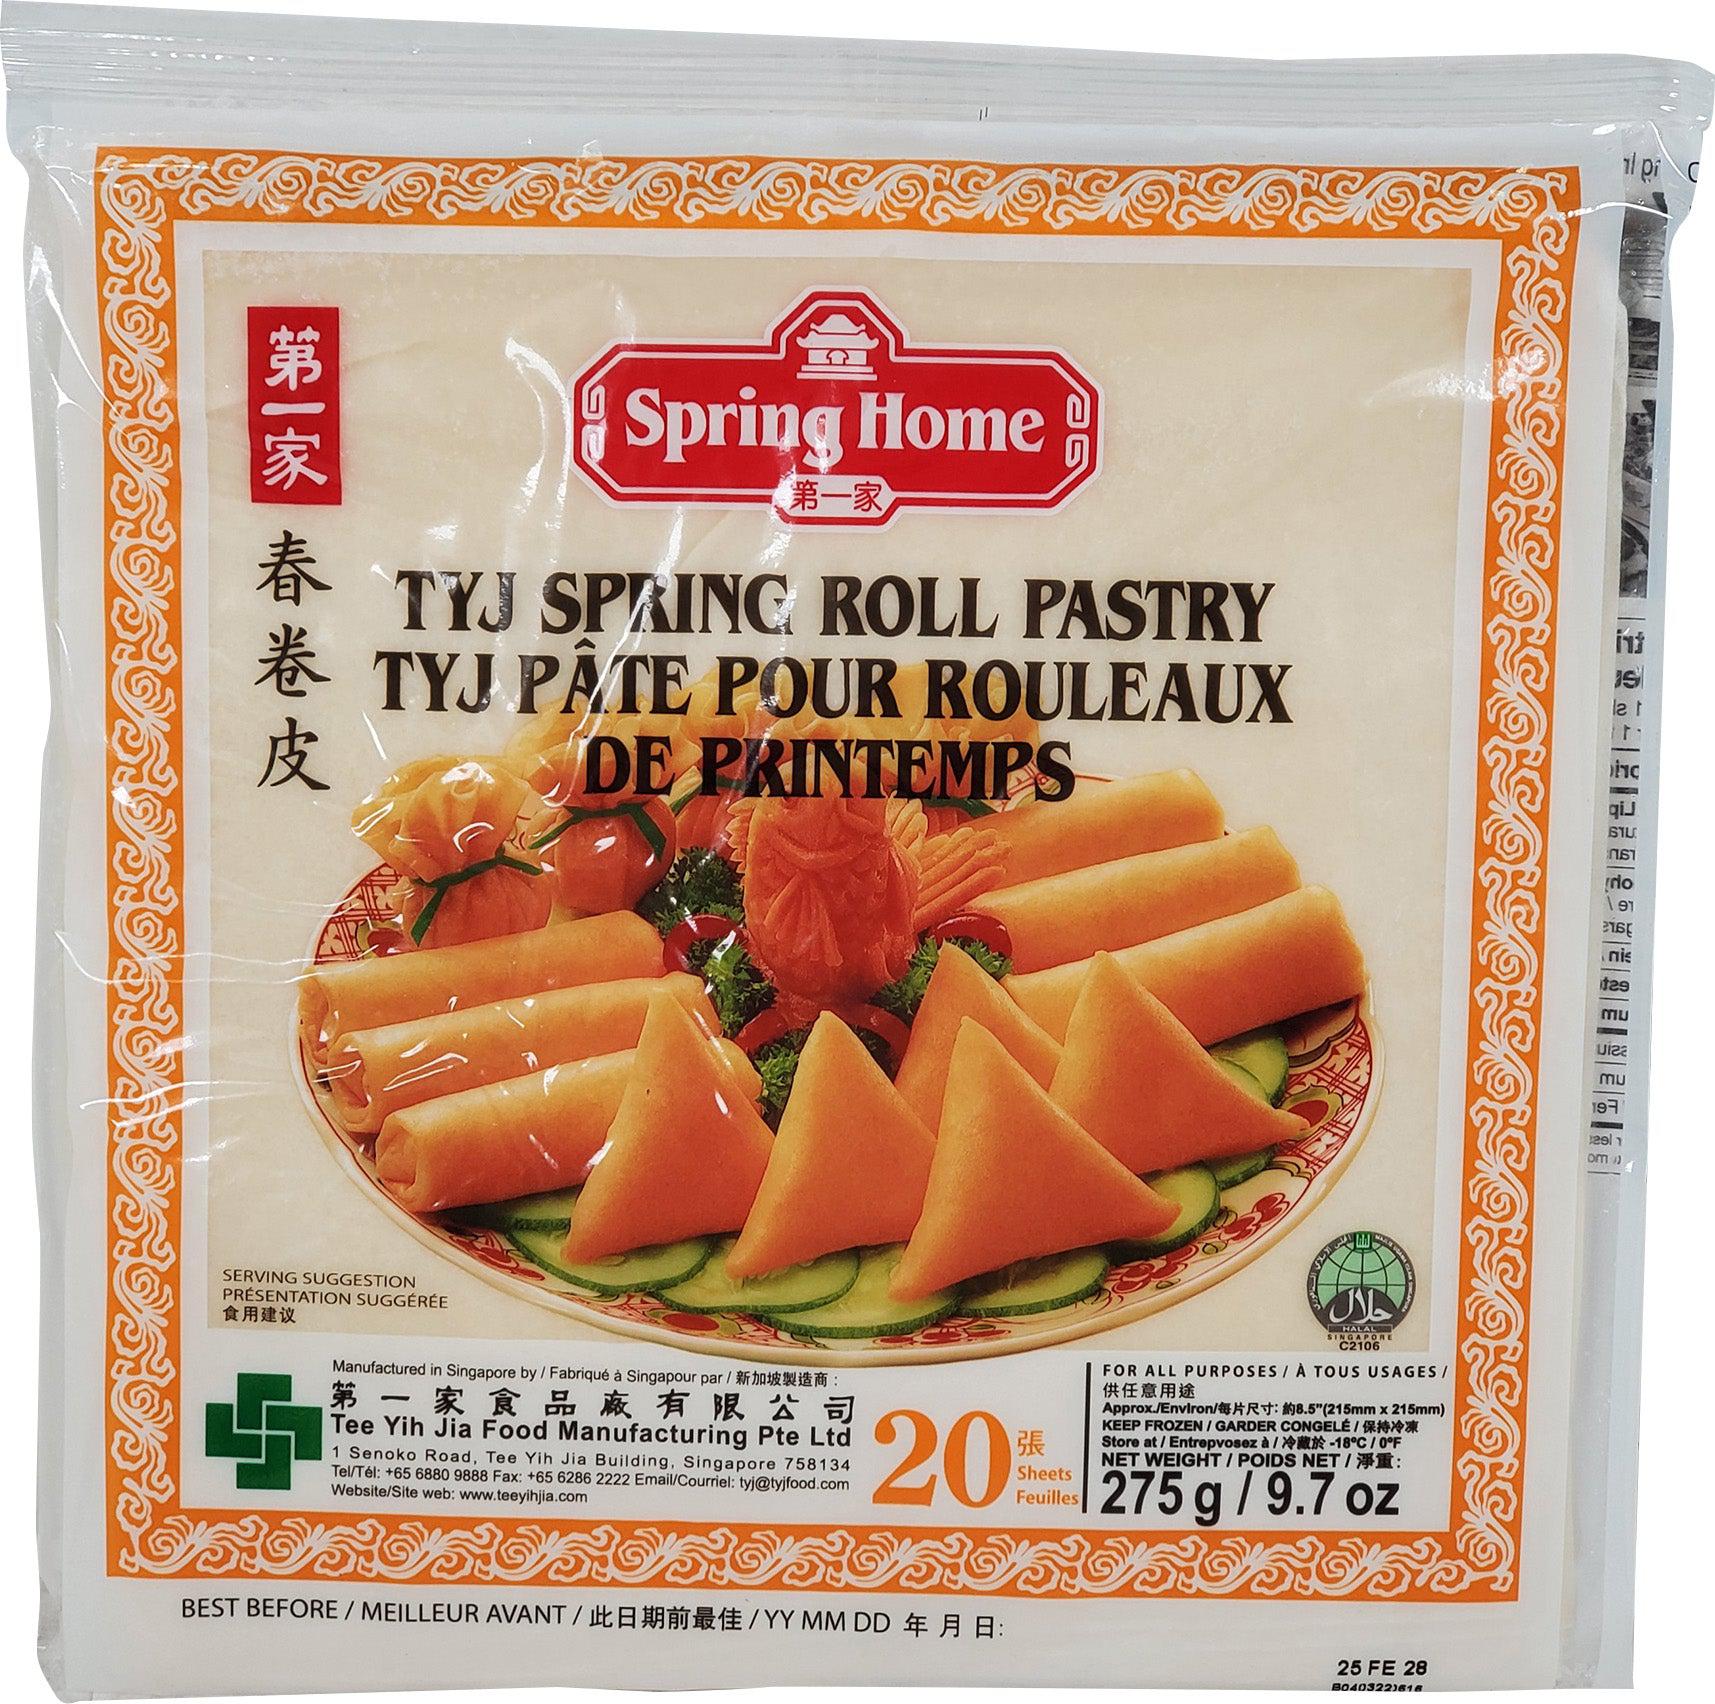 KG Pastry Spring Roll Pastry 8.5 40s